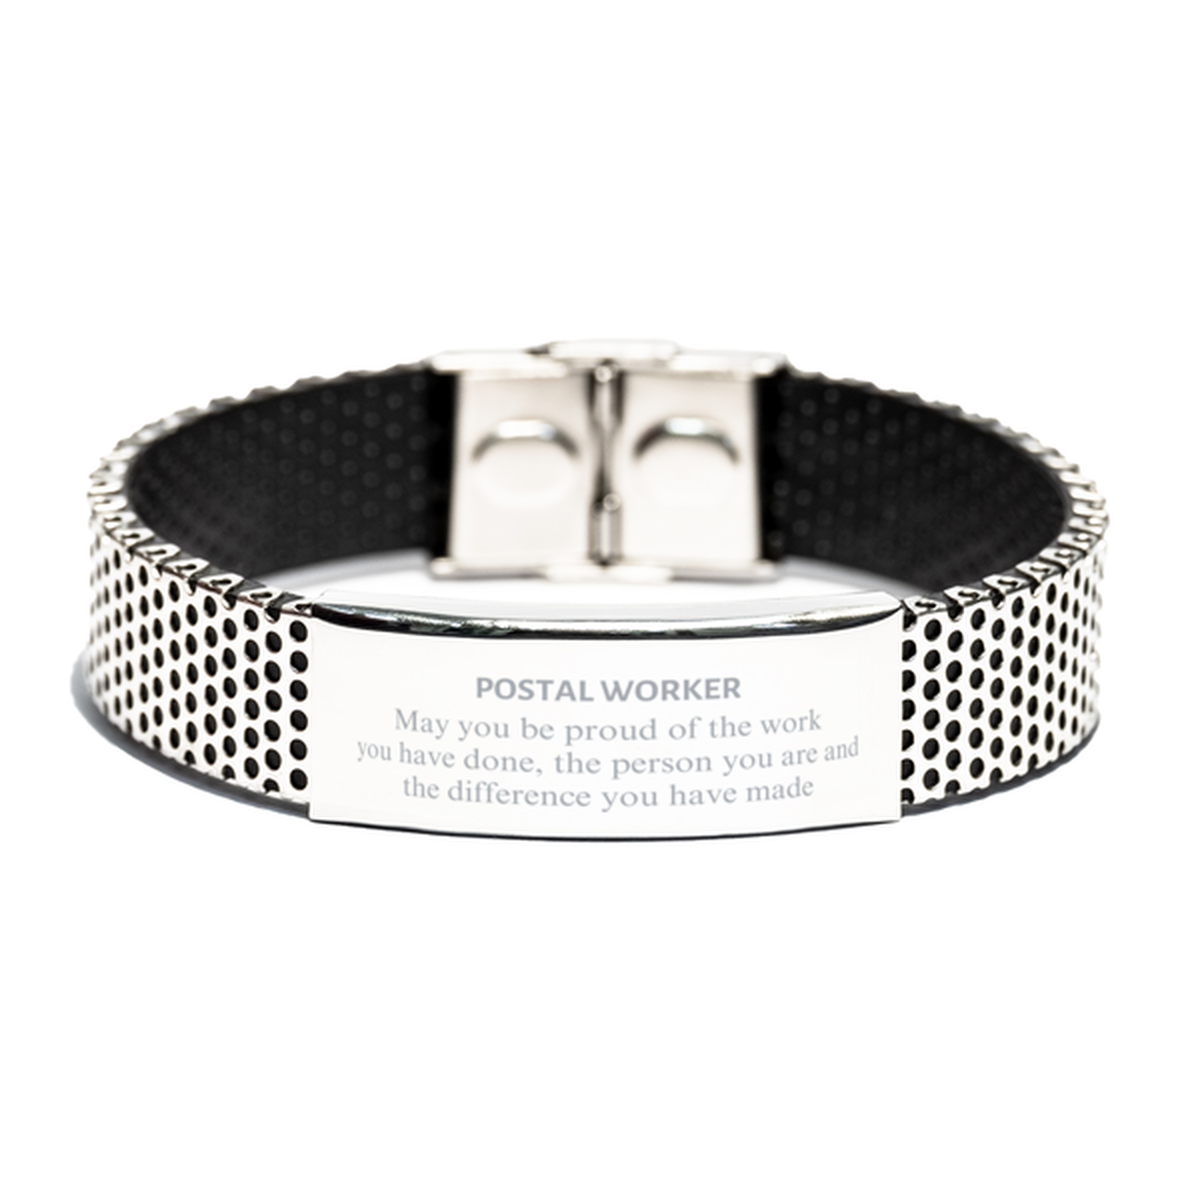 Postal Worker May you be proud of the work you have done, Retirement Postal Worker Stainless Steel Bracelet for Colleague Appreciation Gifts Amazing for Postal Worker